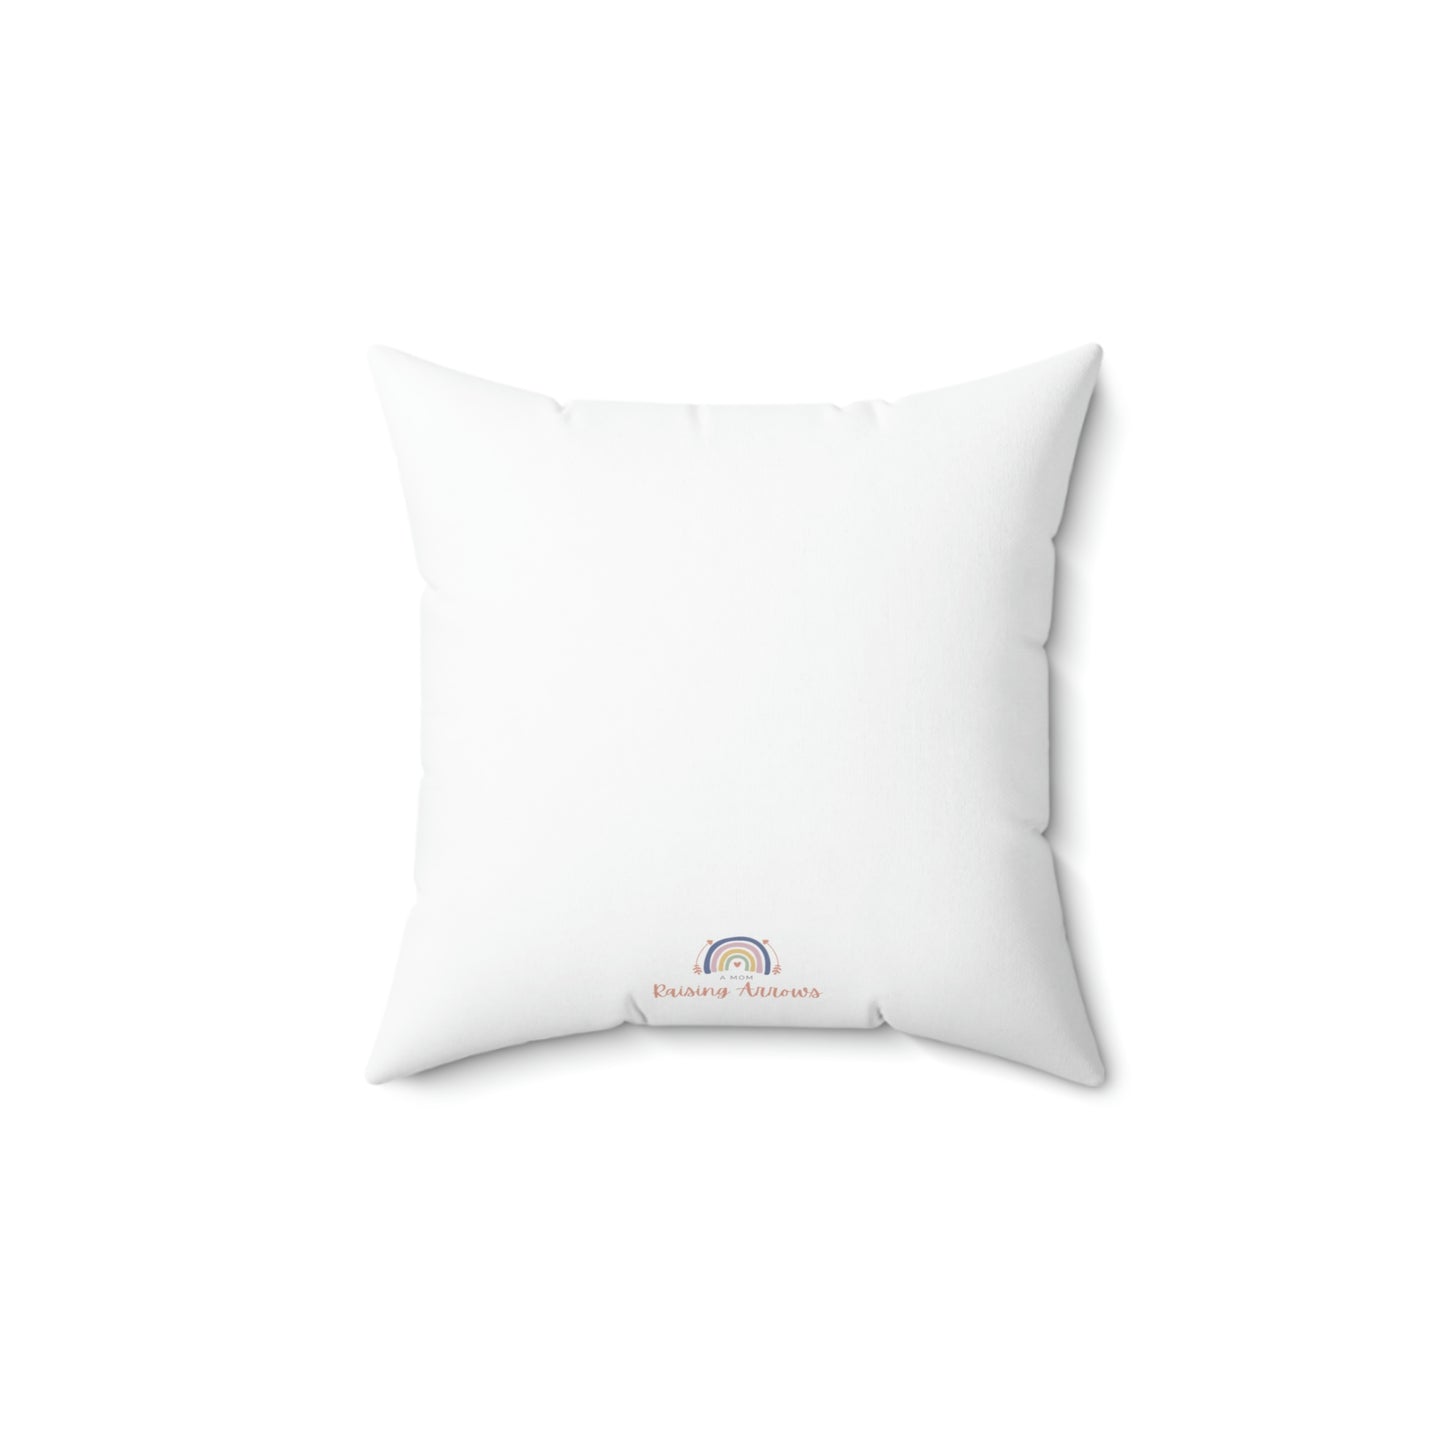 Be strong and courages pillow